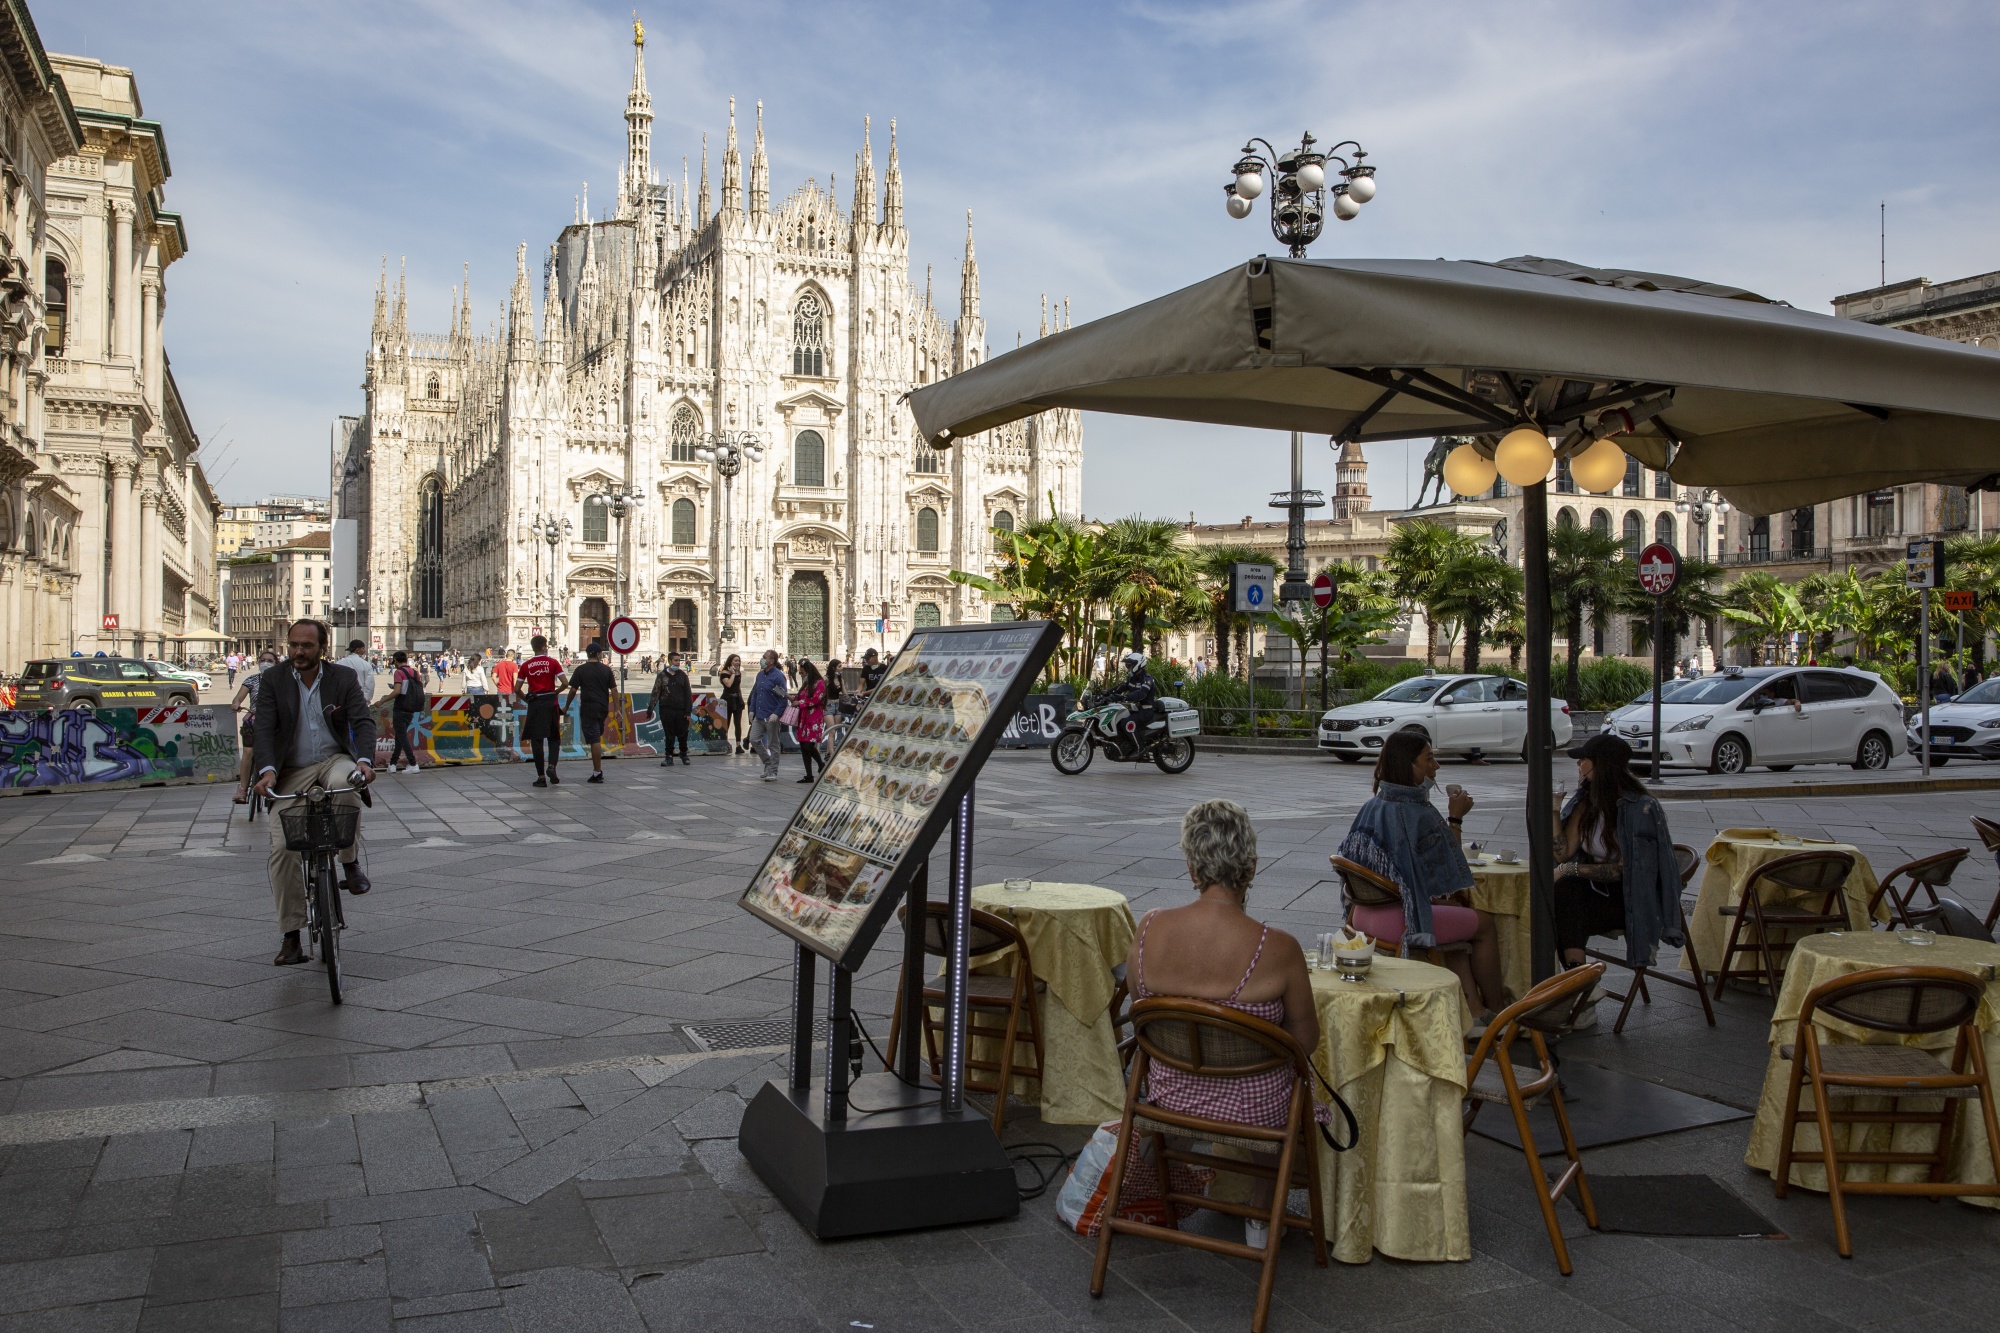 Diners at a restaurant in the Cathedral square in Milan, on May 18.